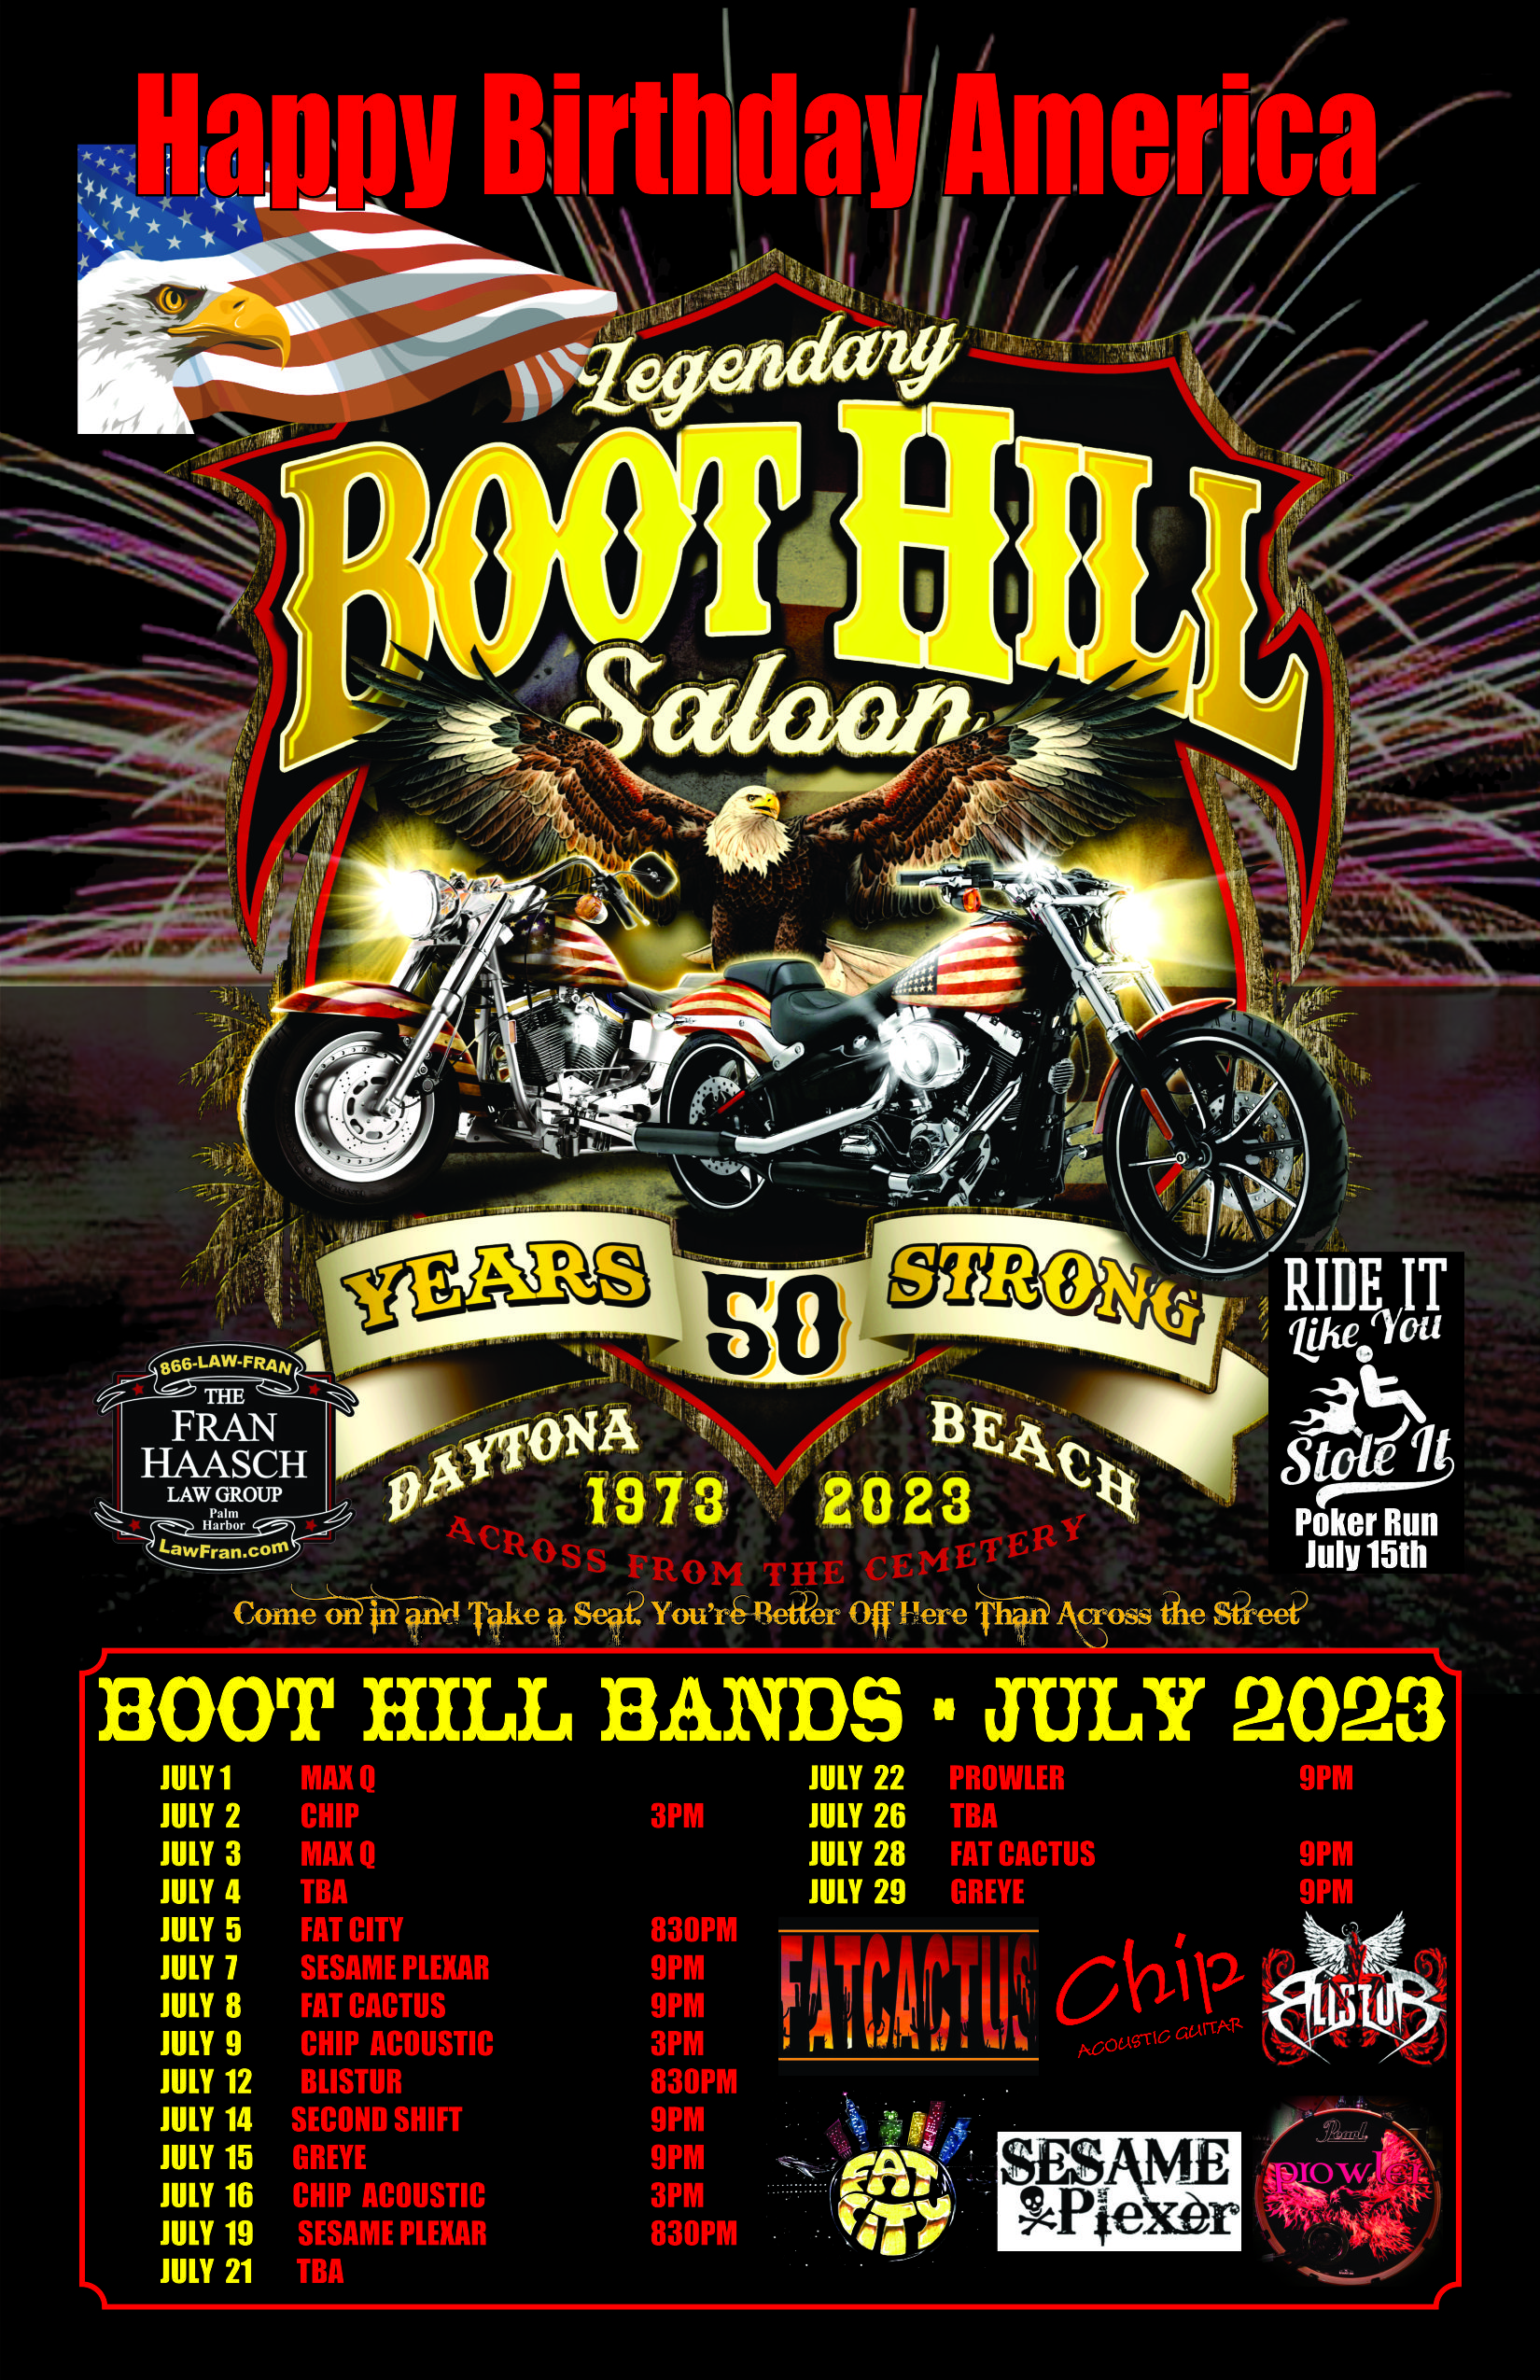 The Legendary Boot Hill Saloon July Bands